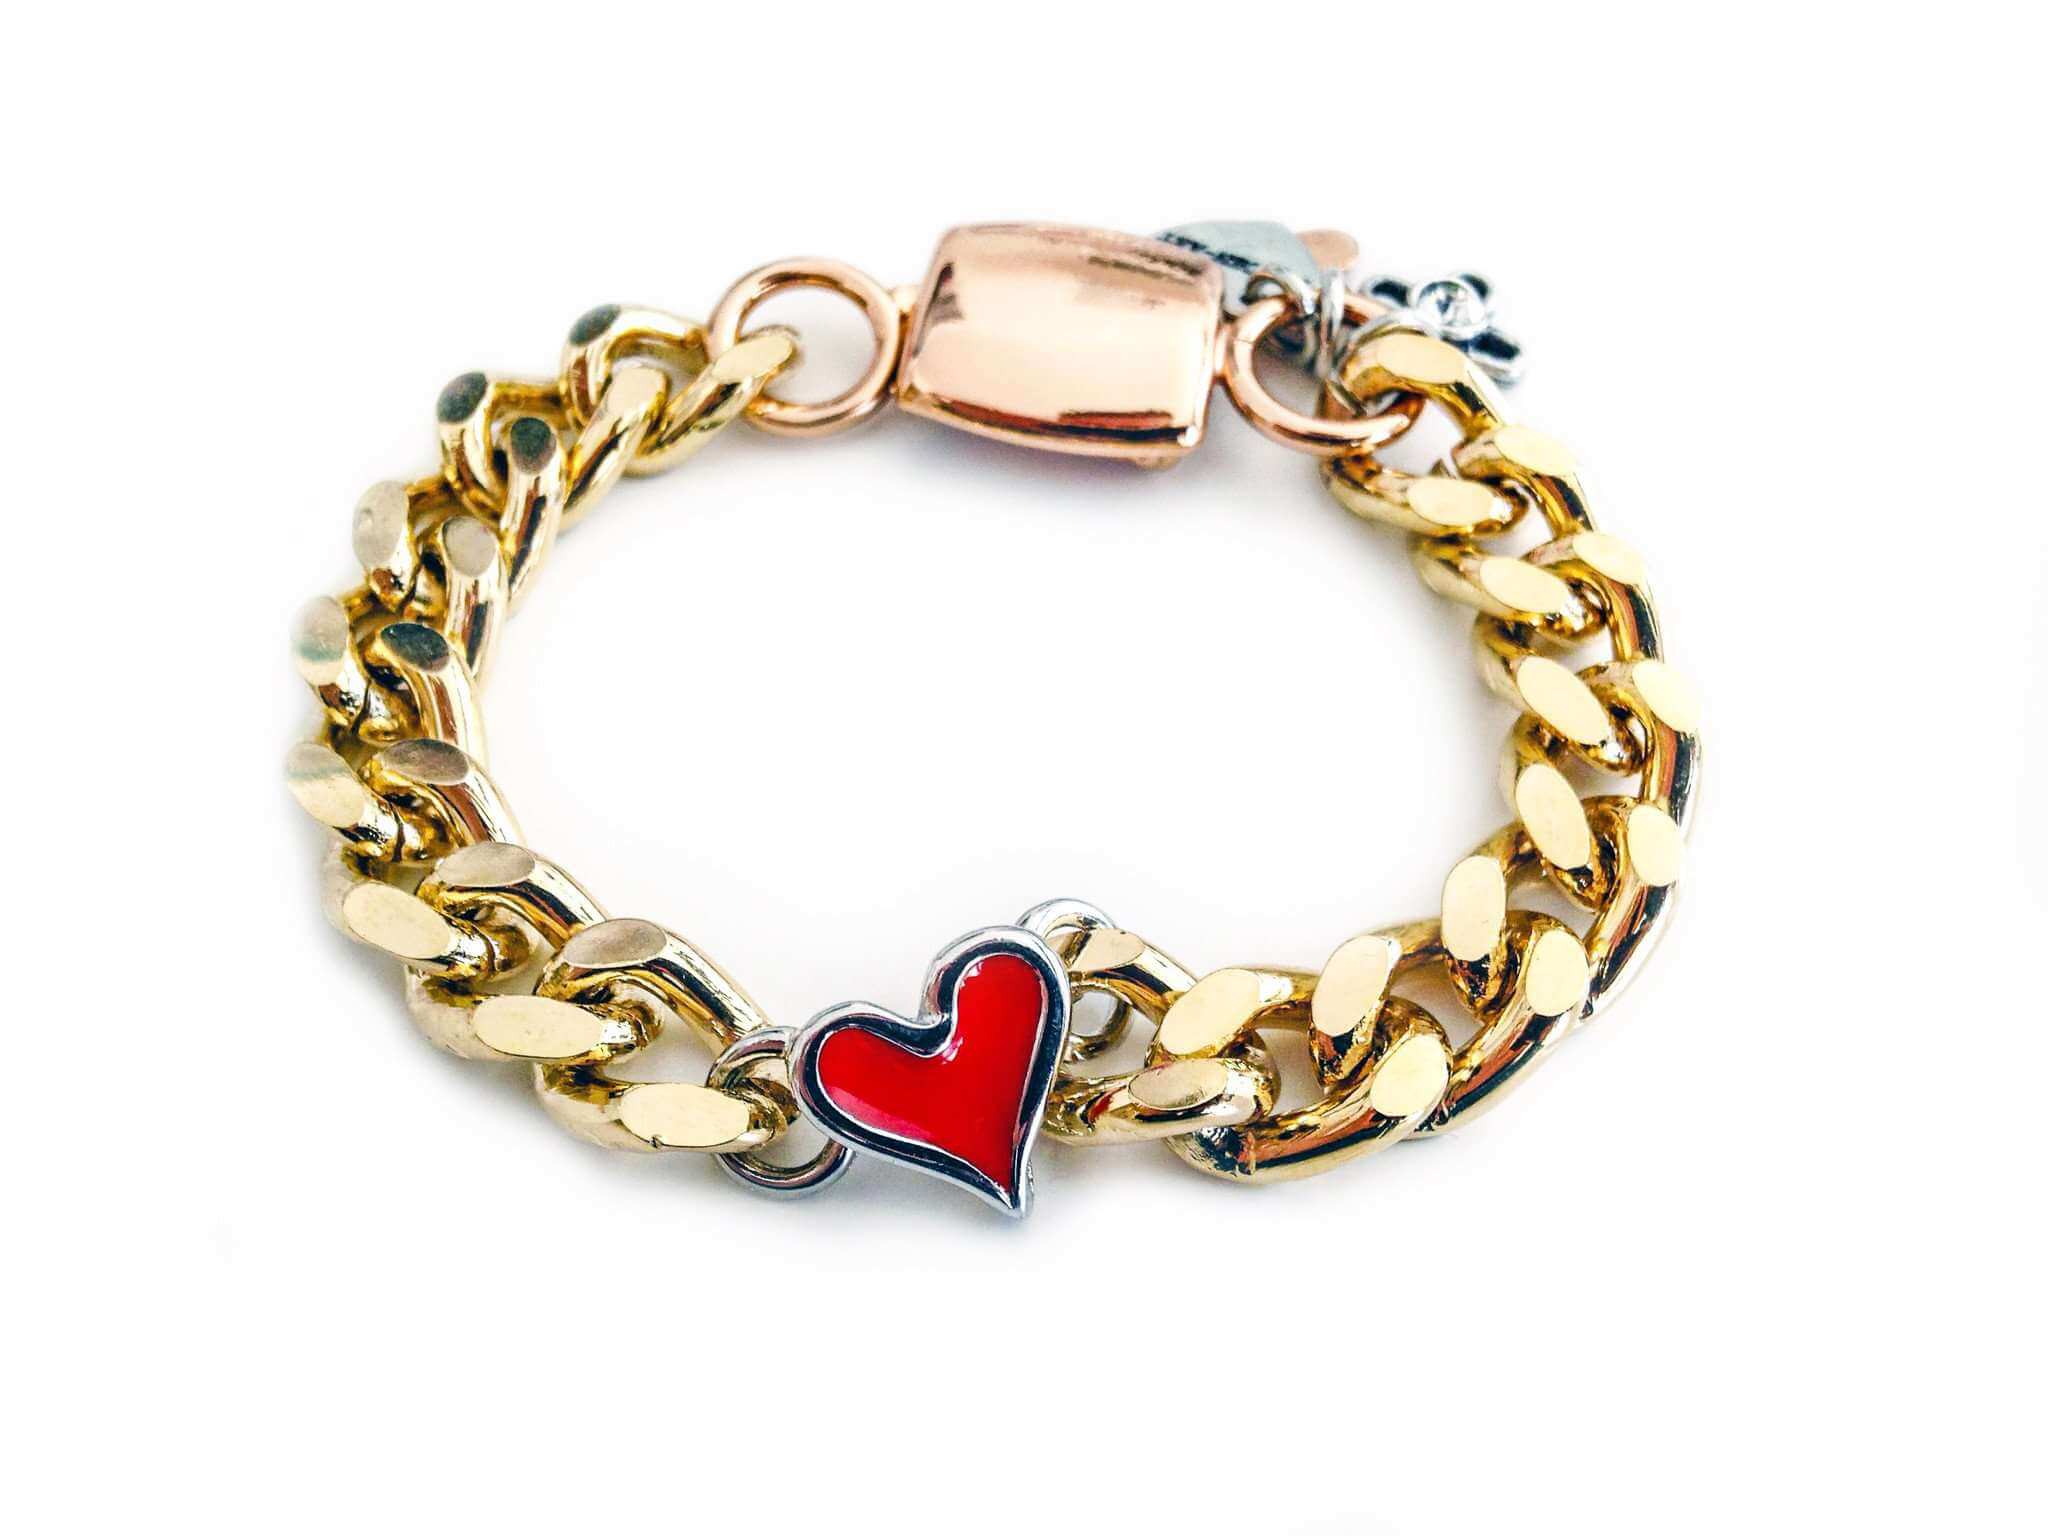 Gold chain bracelet with red heart shaped charm - Maiden-Art